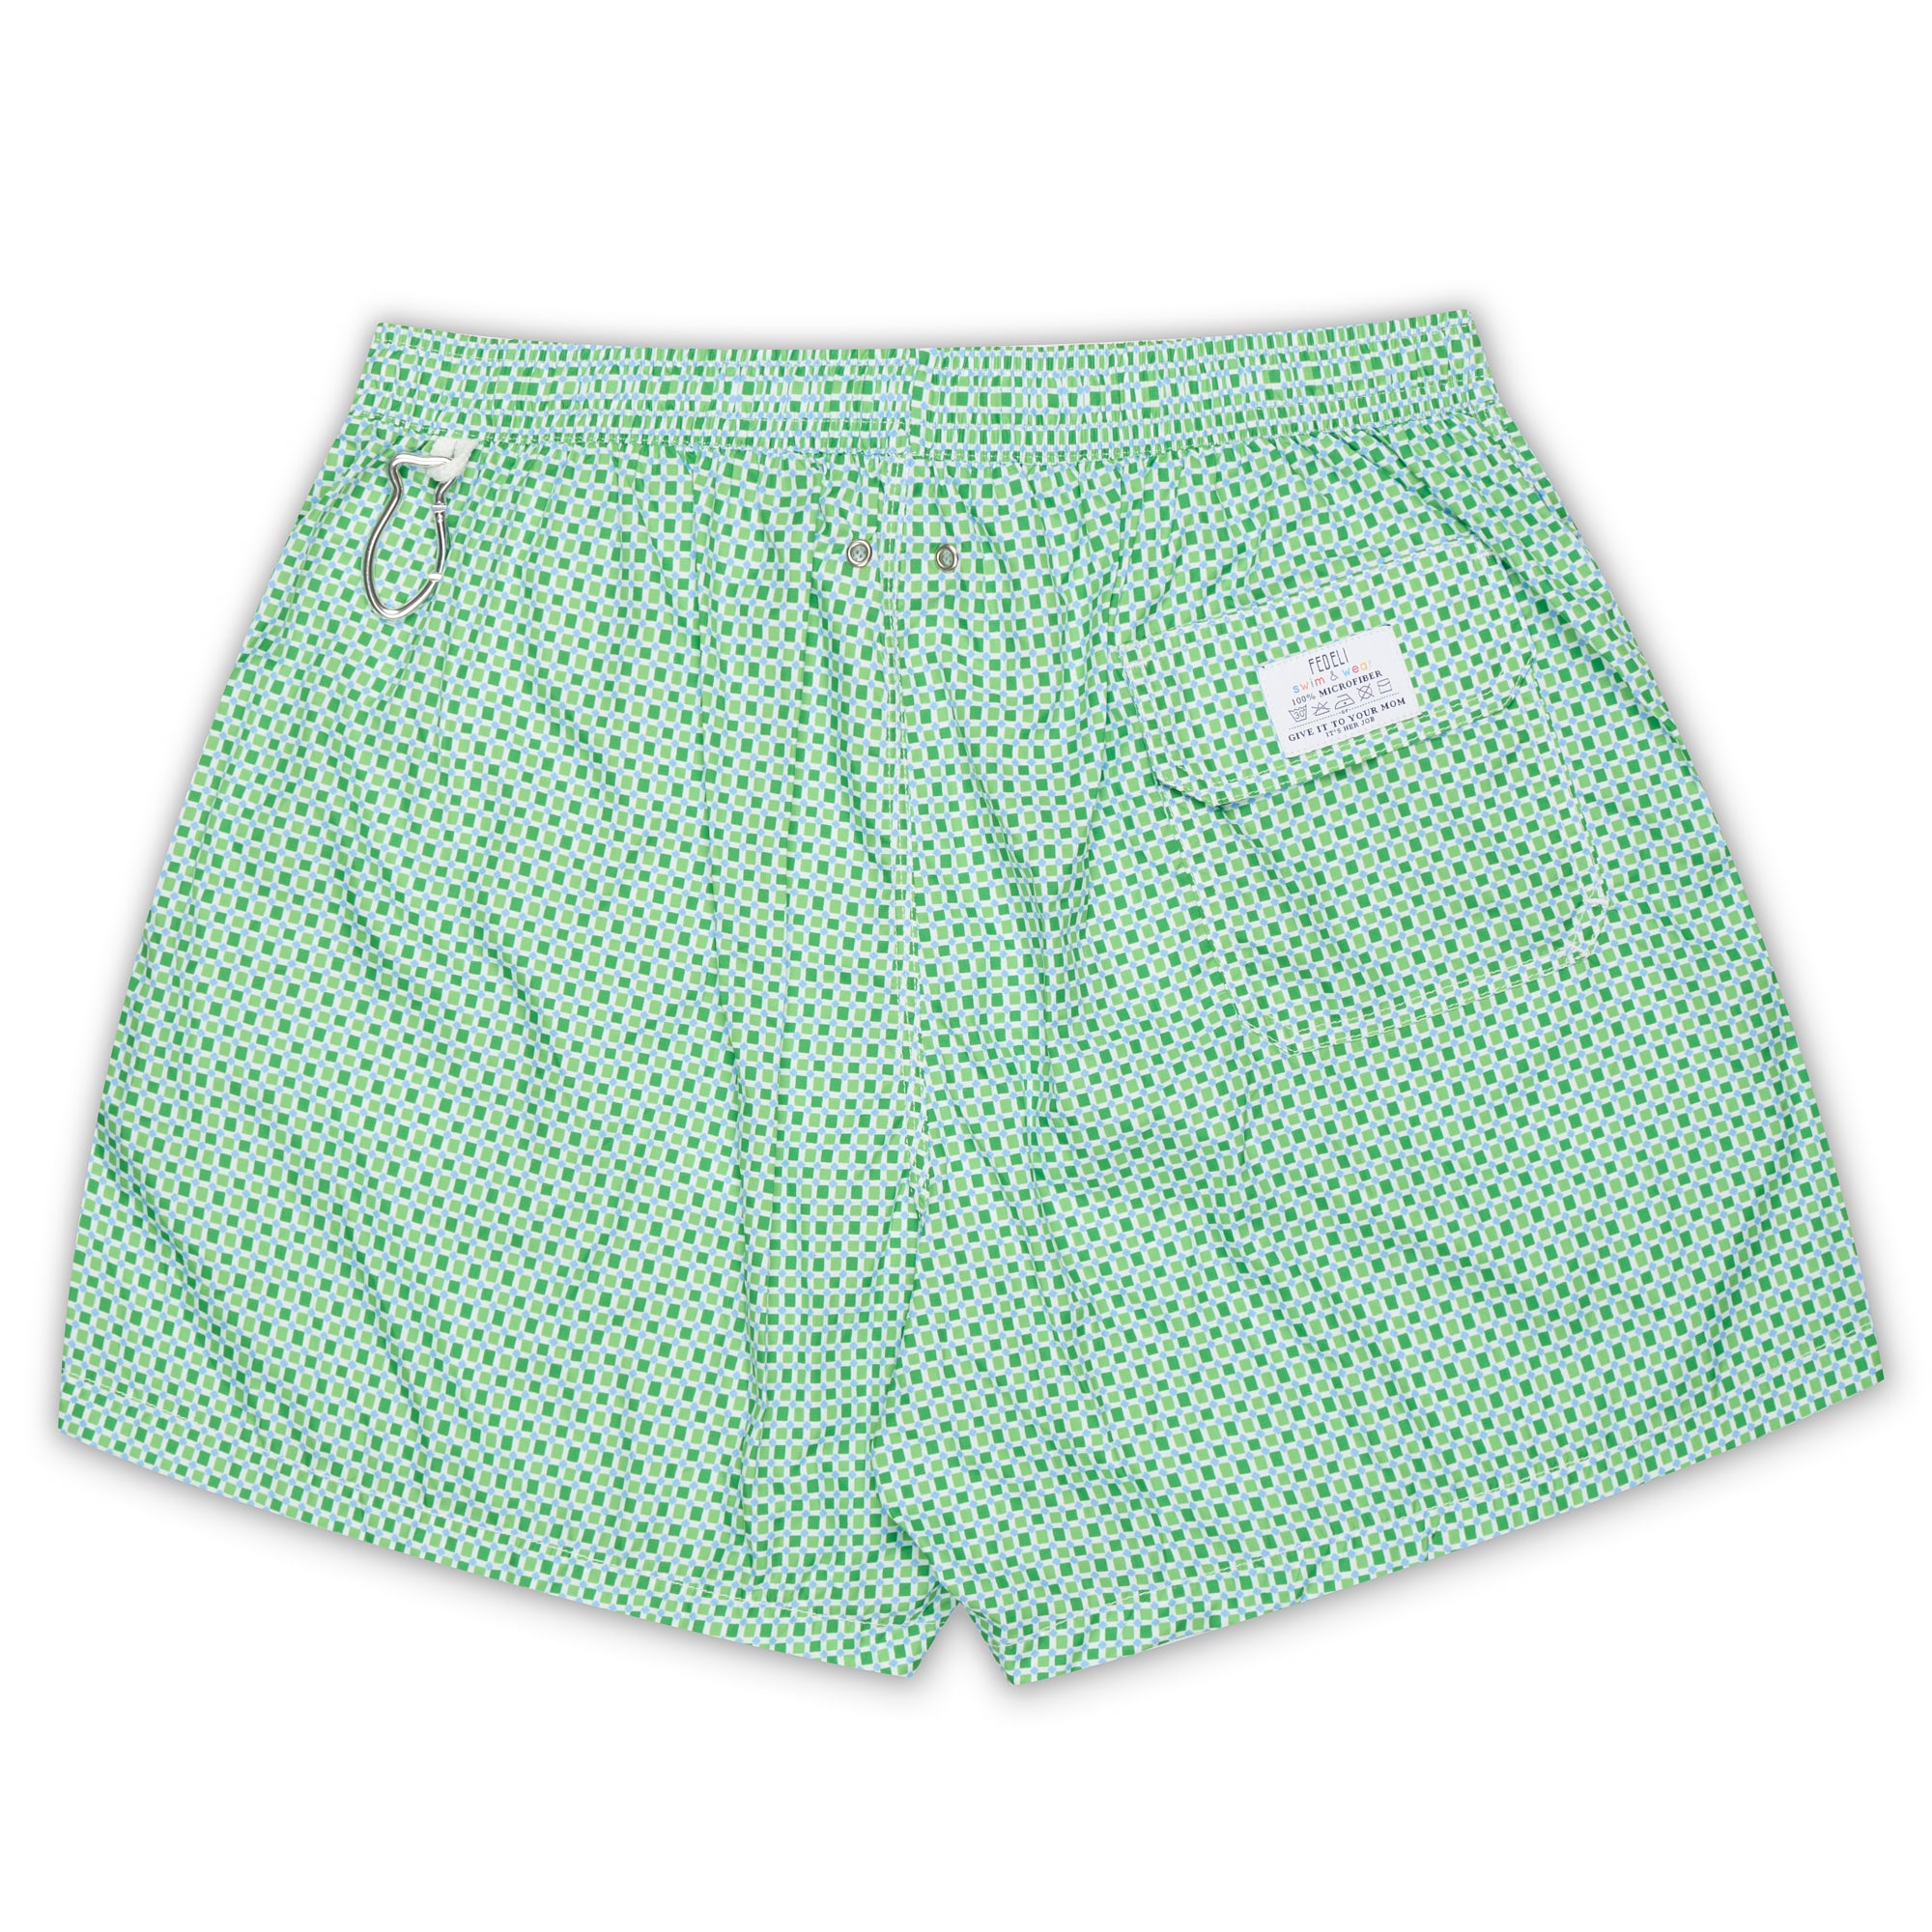 FEDELI Green Checkered Printed Madeira Airstop Trunks Swim Shorts NEW 2XL